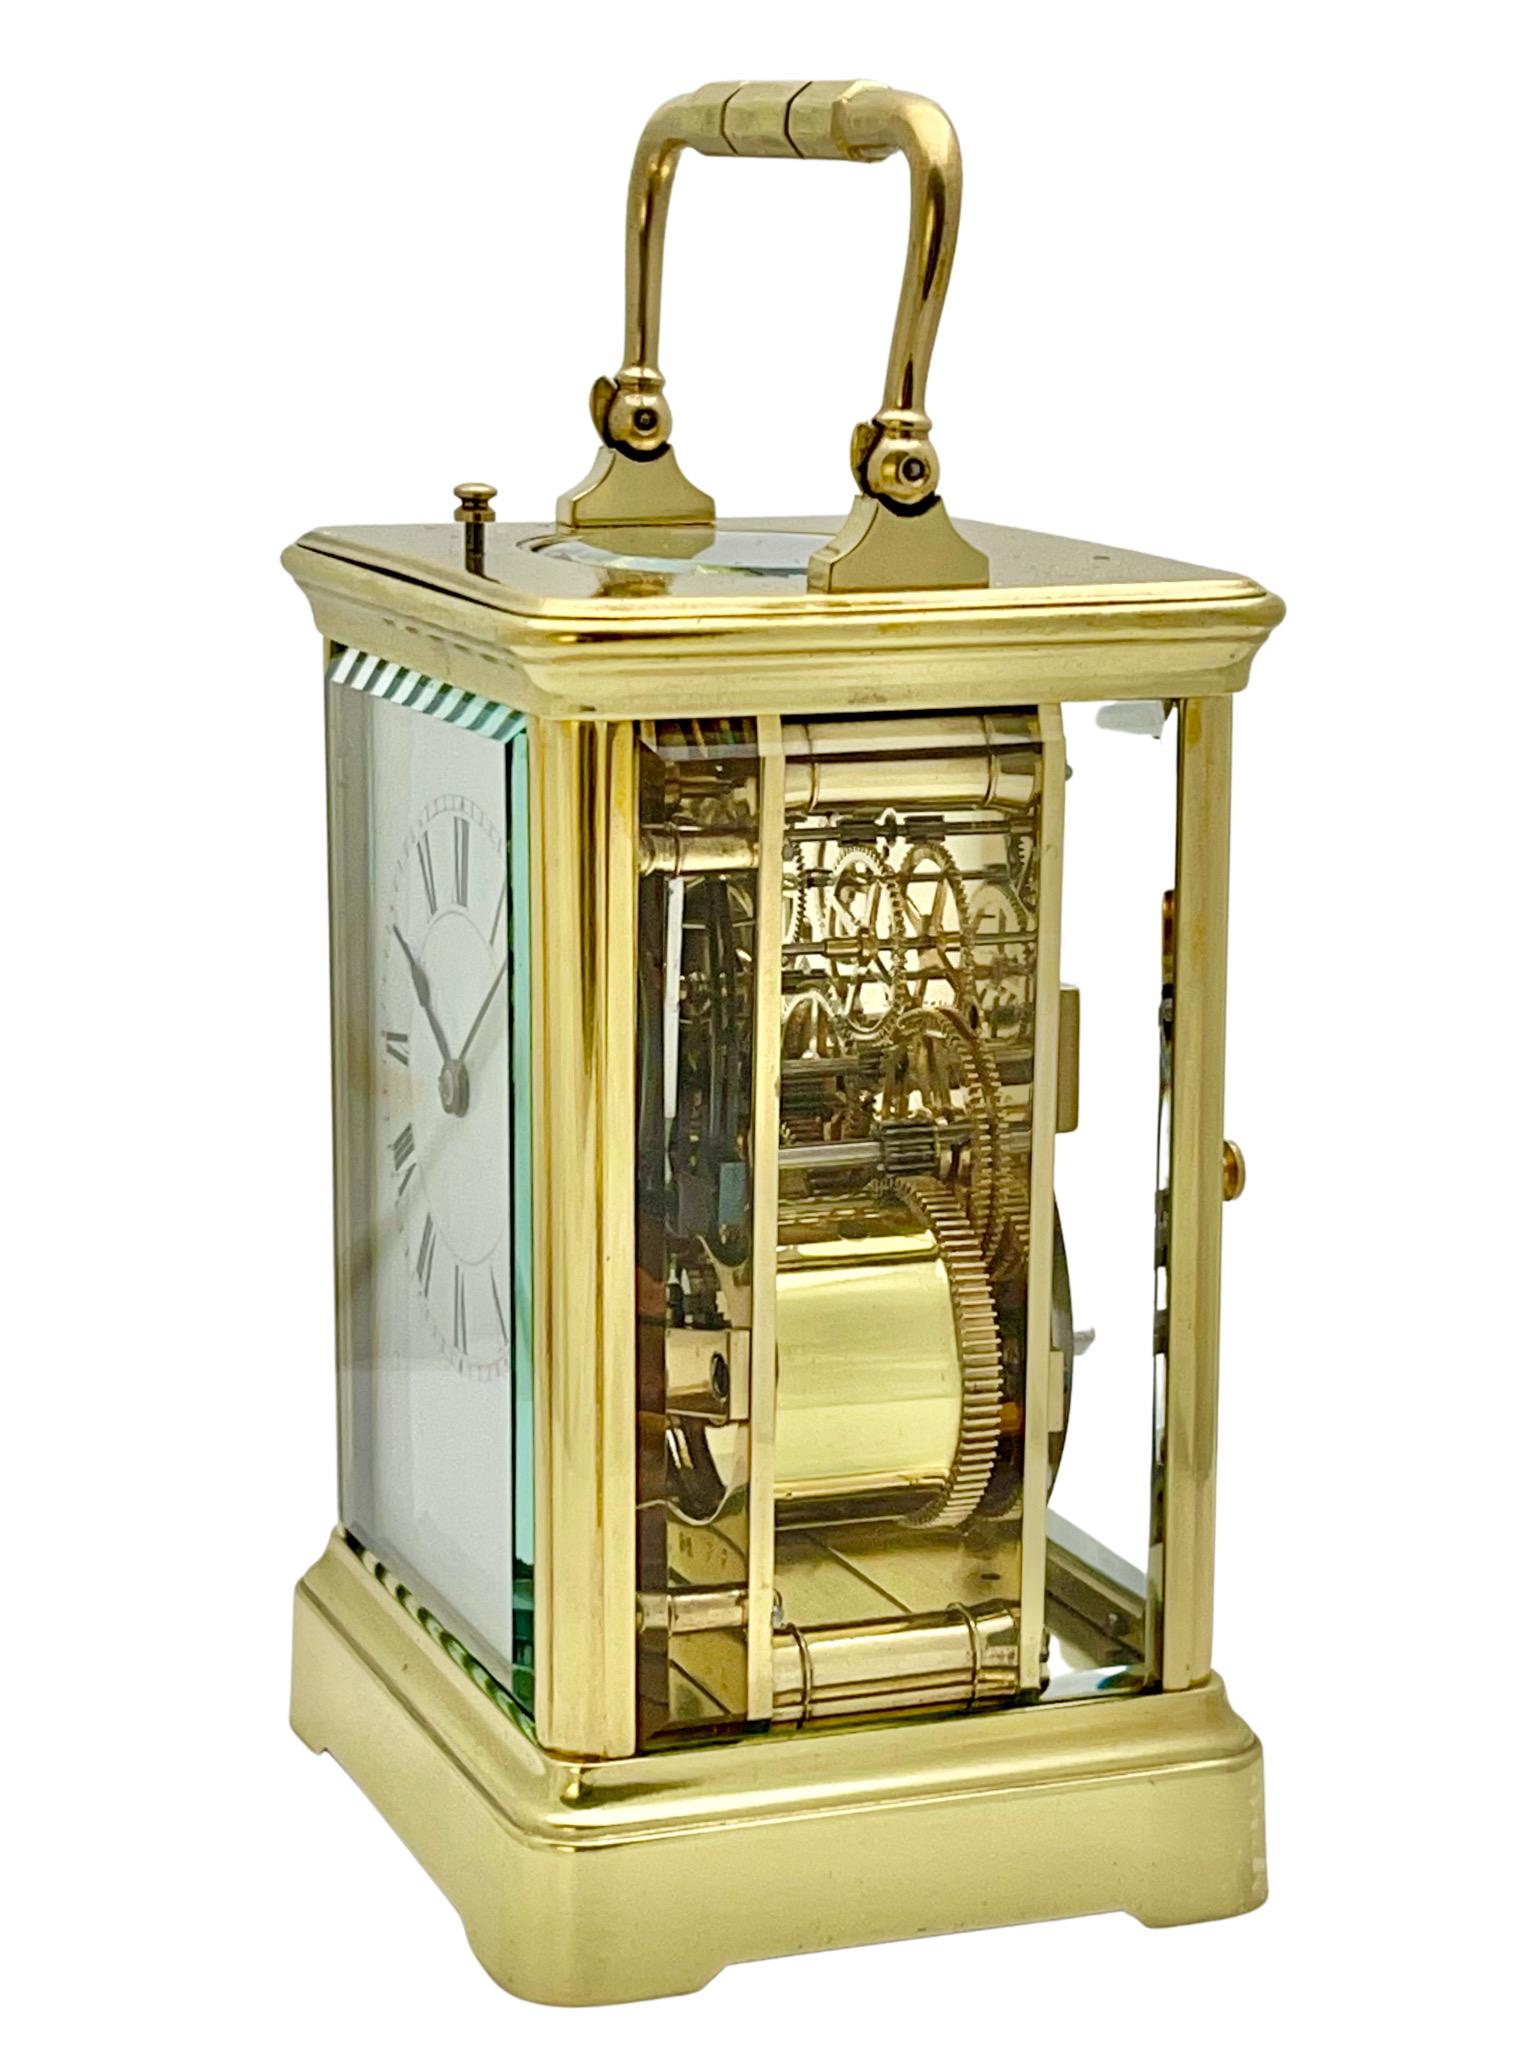 A wonderful antique French eight day striking and repeating carriage clock by Henri Jacot, Paris.

The case is polished brass with a fully glazed corniche style case with pivoted carrying handle and hour strike repeat button to the top. A white